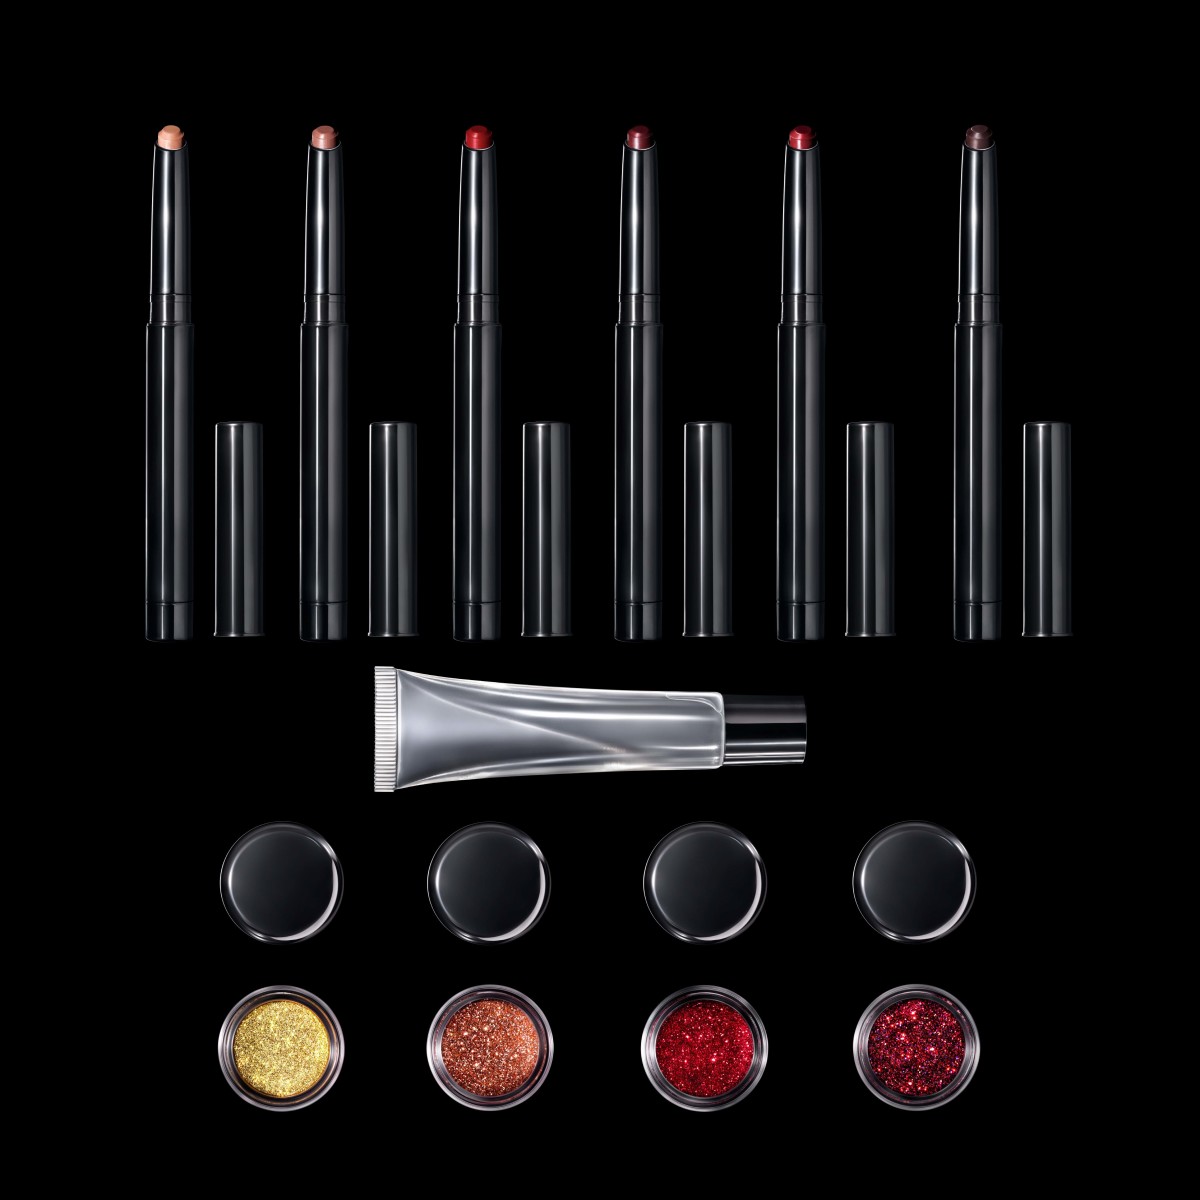 Pat McGrath Labs 004, available on August 30. Photo: Courtesy of Pat McGrath Labs